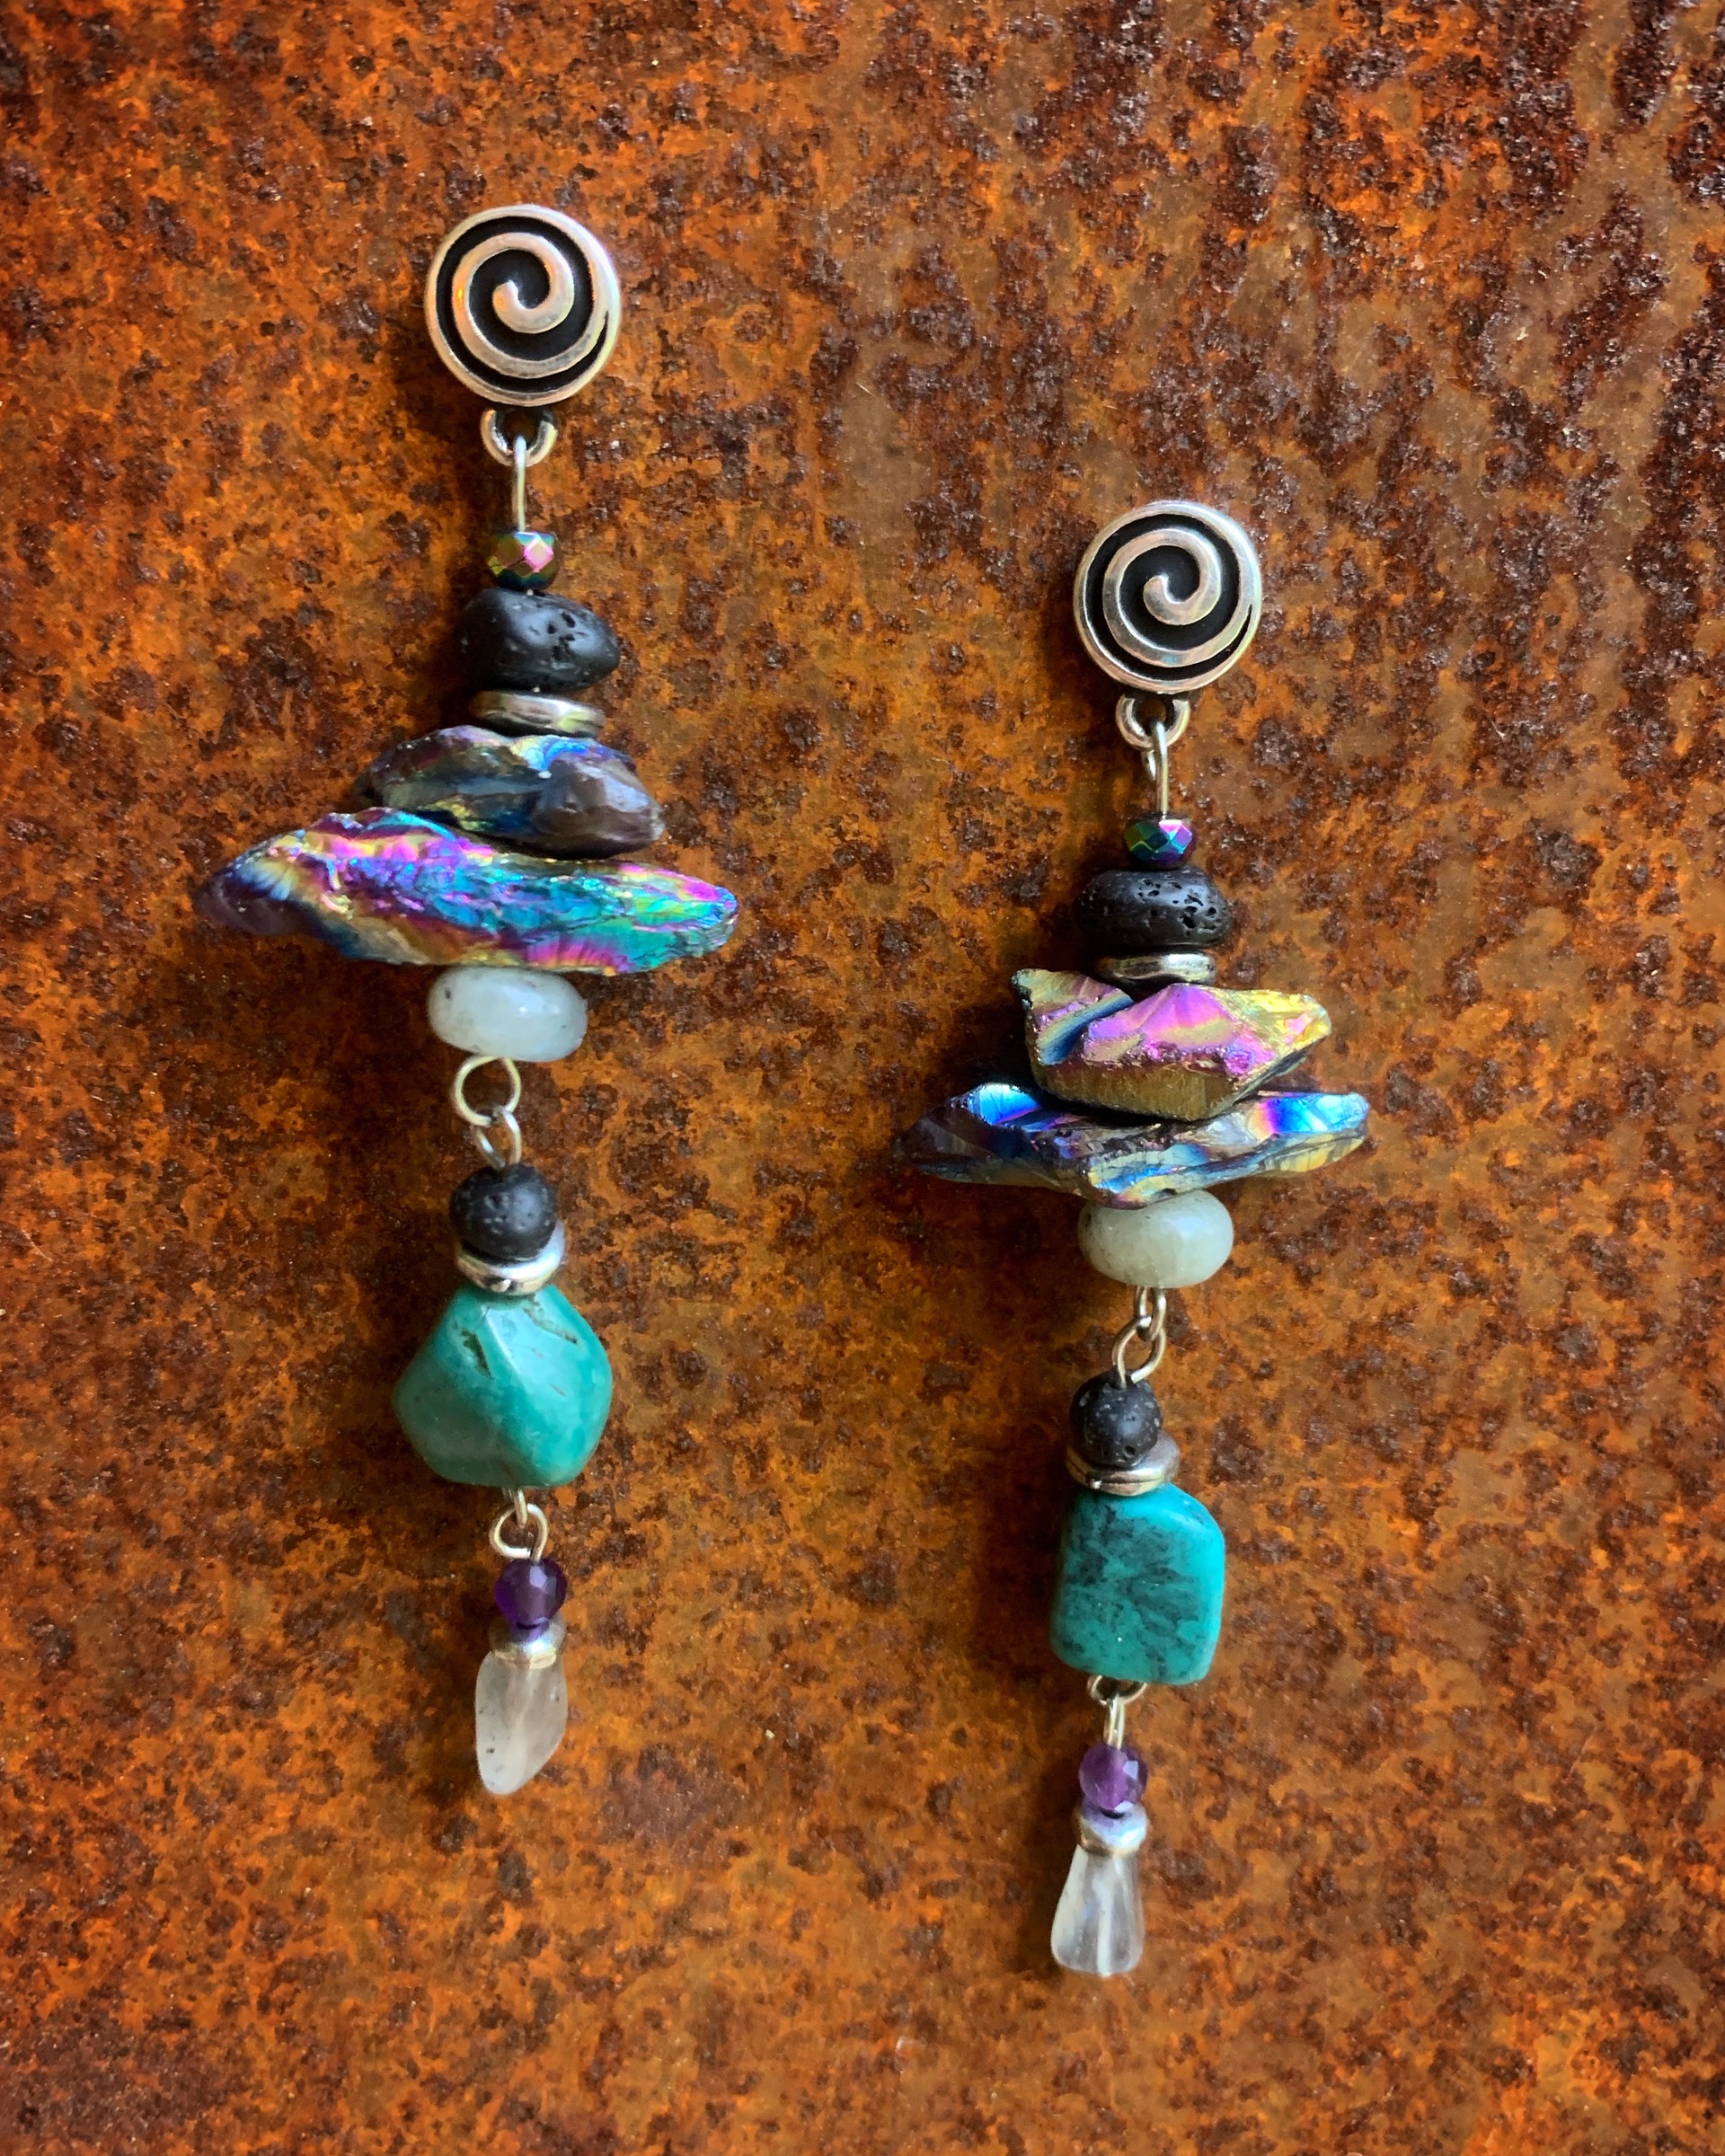 K608 Titanuim Coated Quartz, Turquoise, and Labradorite Earrings by Kelly Ormsby